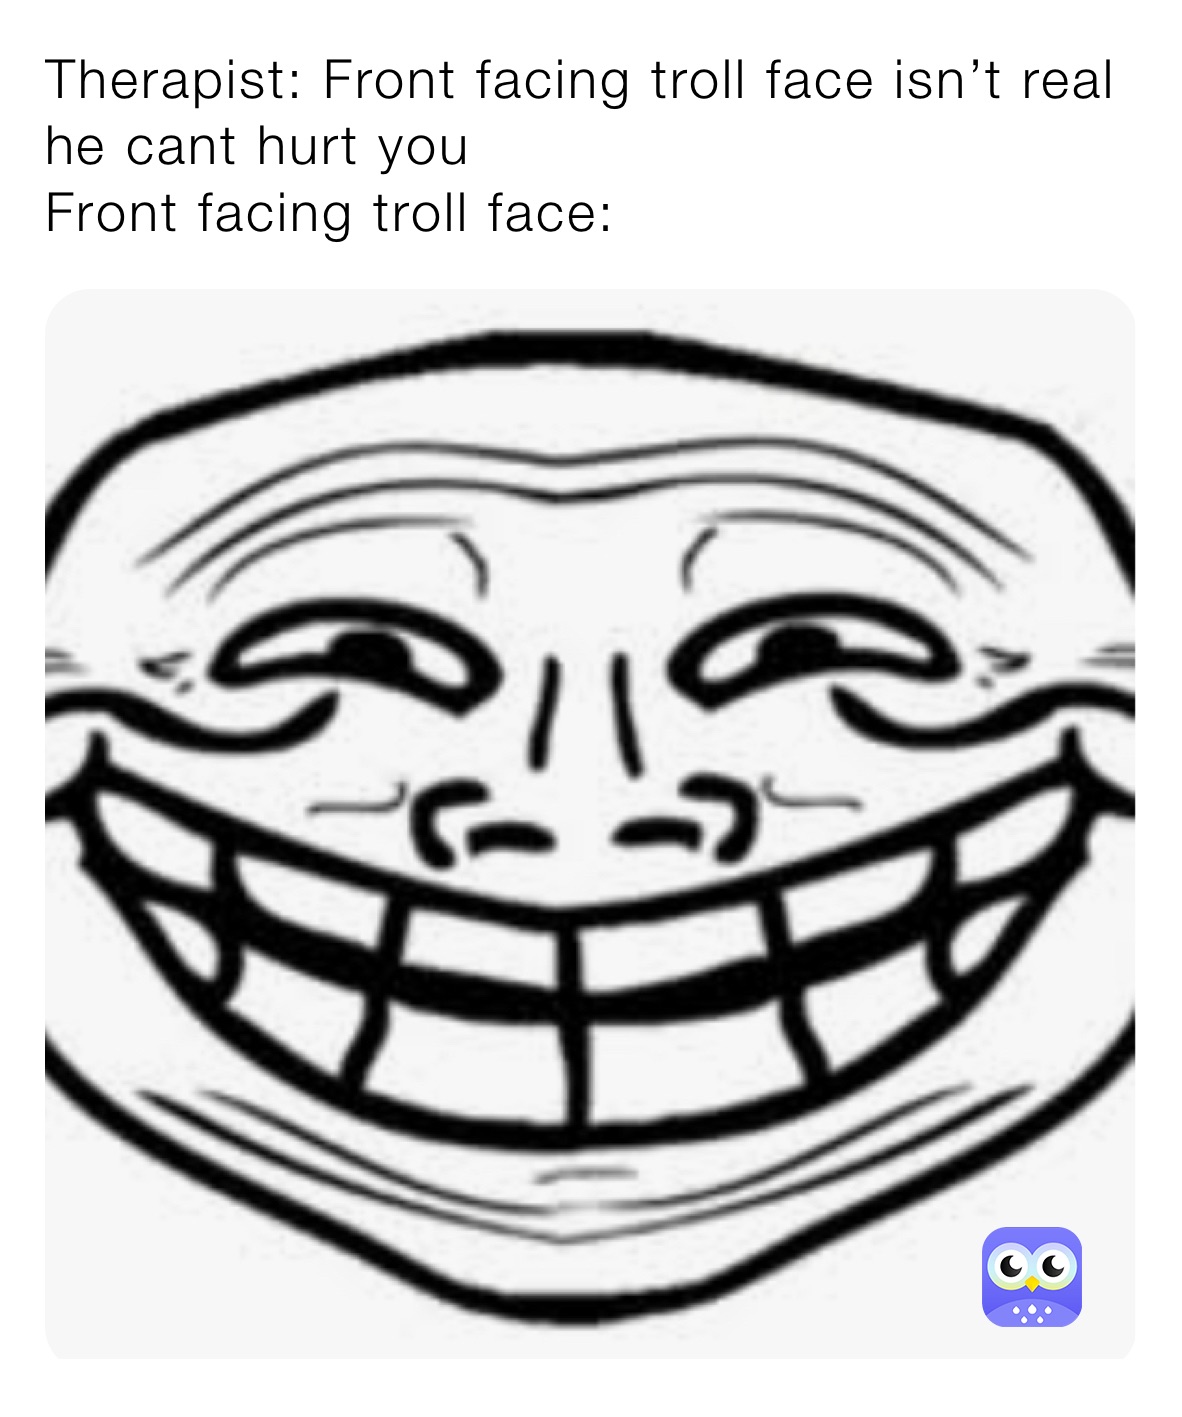 Therapist: Front facing troll face isn’t real he cant hurt you
Front facing troll face: